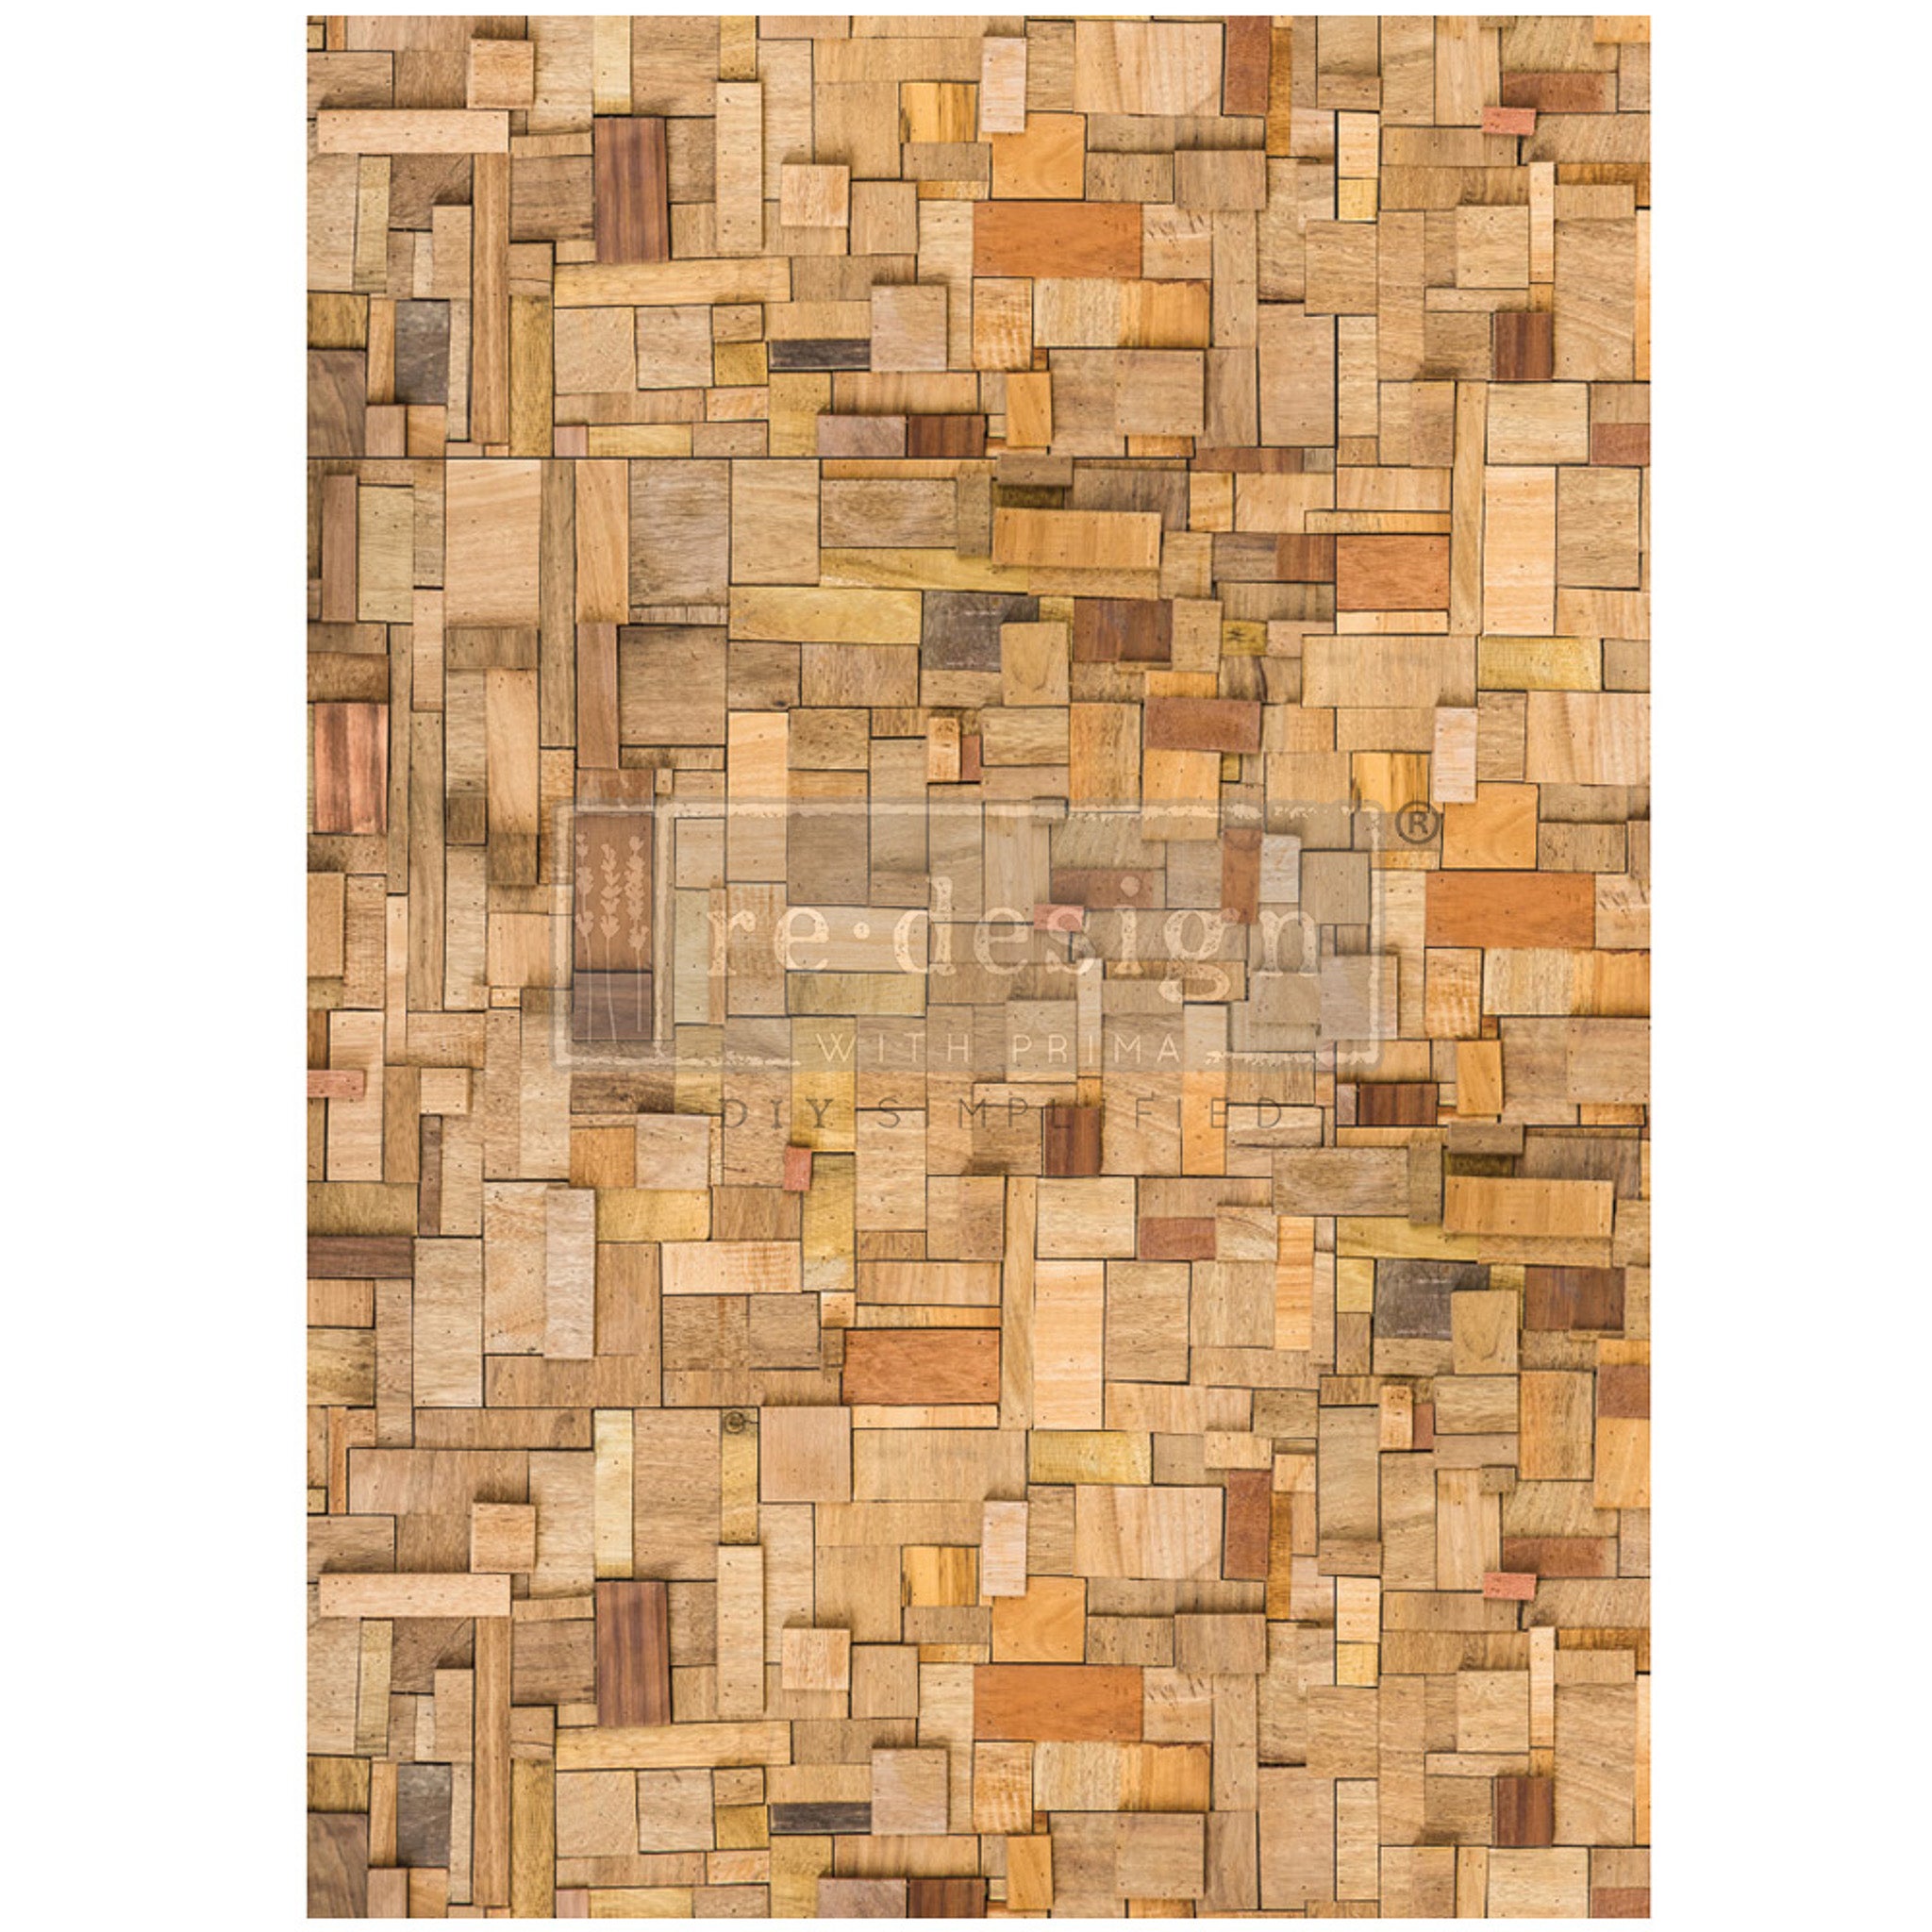 A1 fiber paper design that features a patchwork of wood tiles in various sizes. White borders are on the sides.